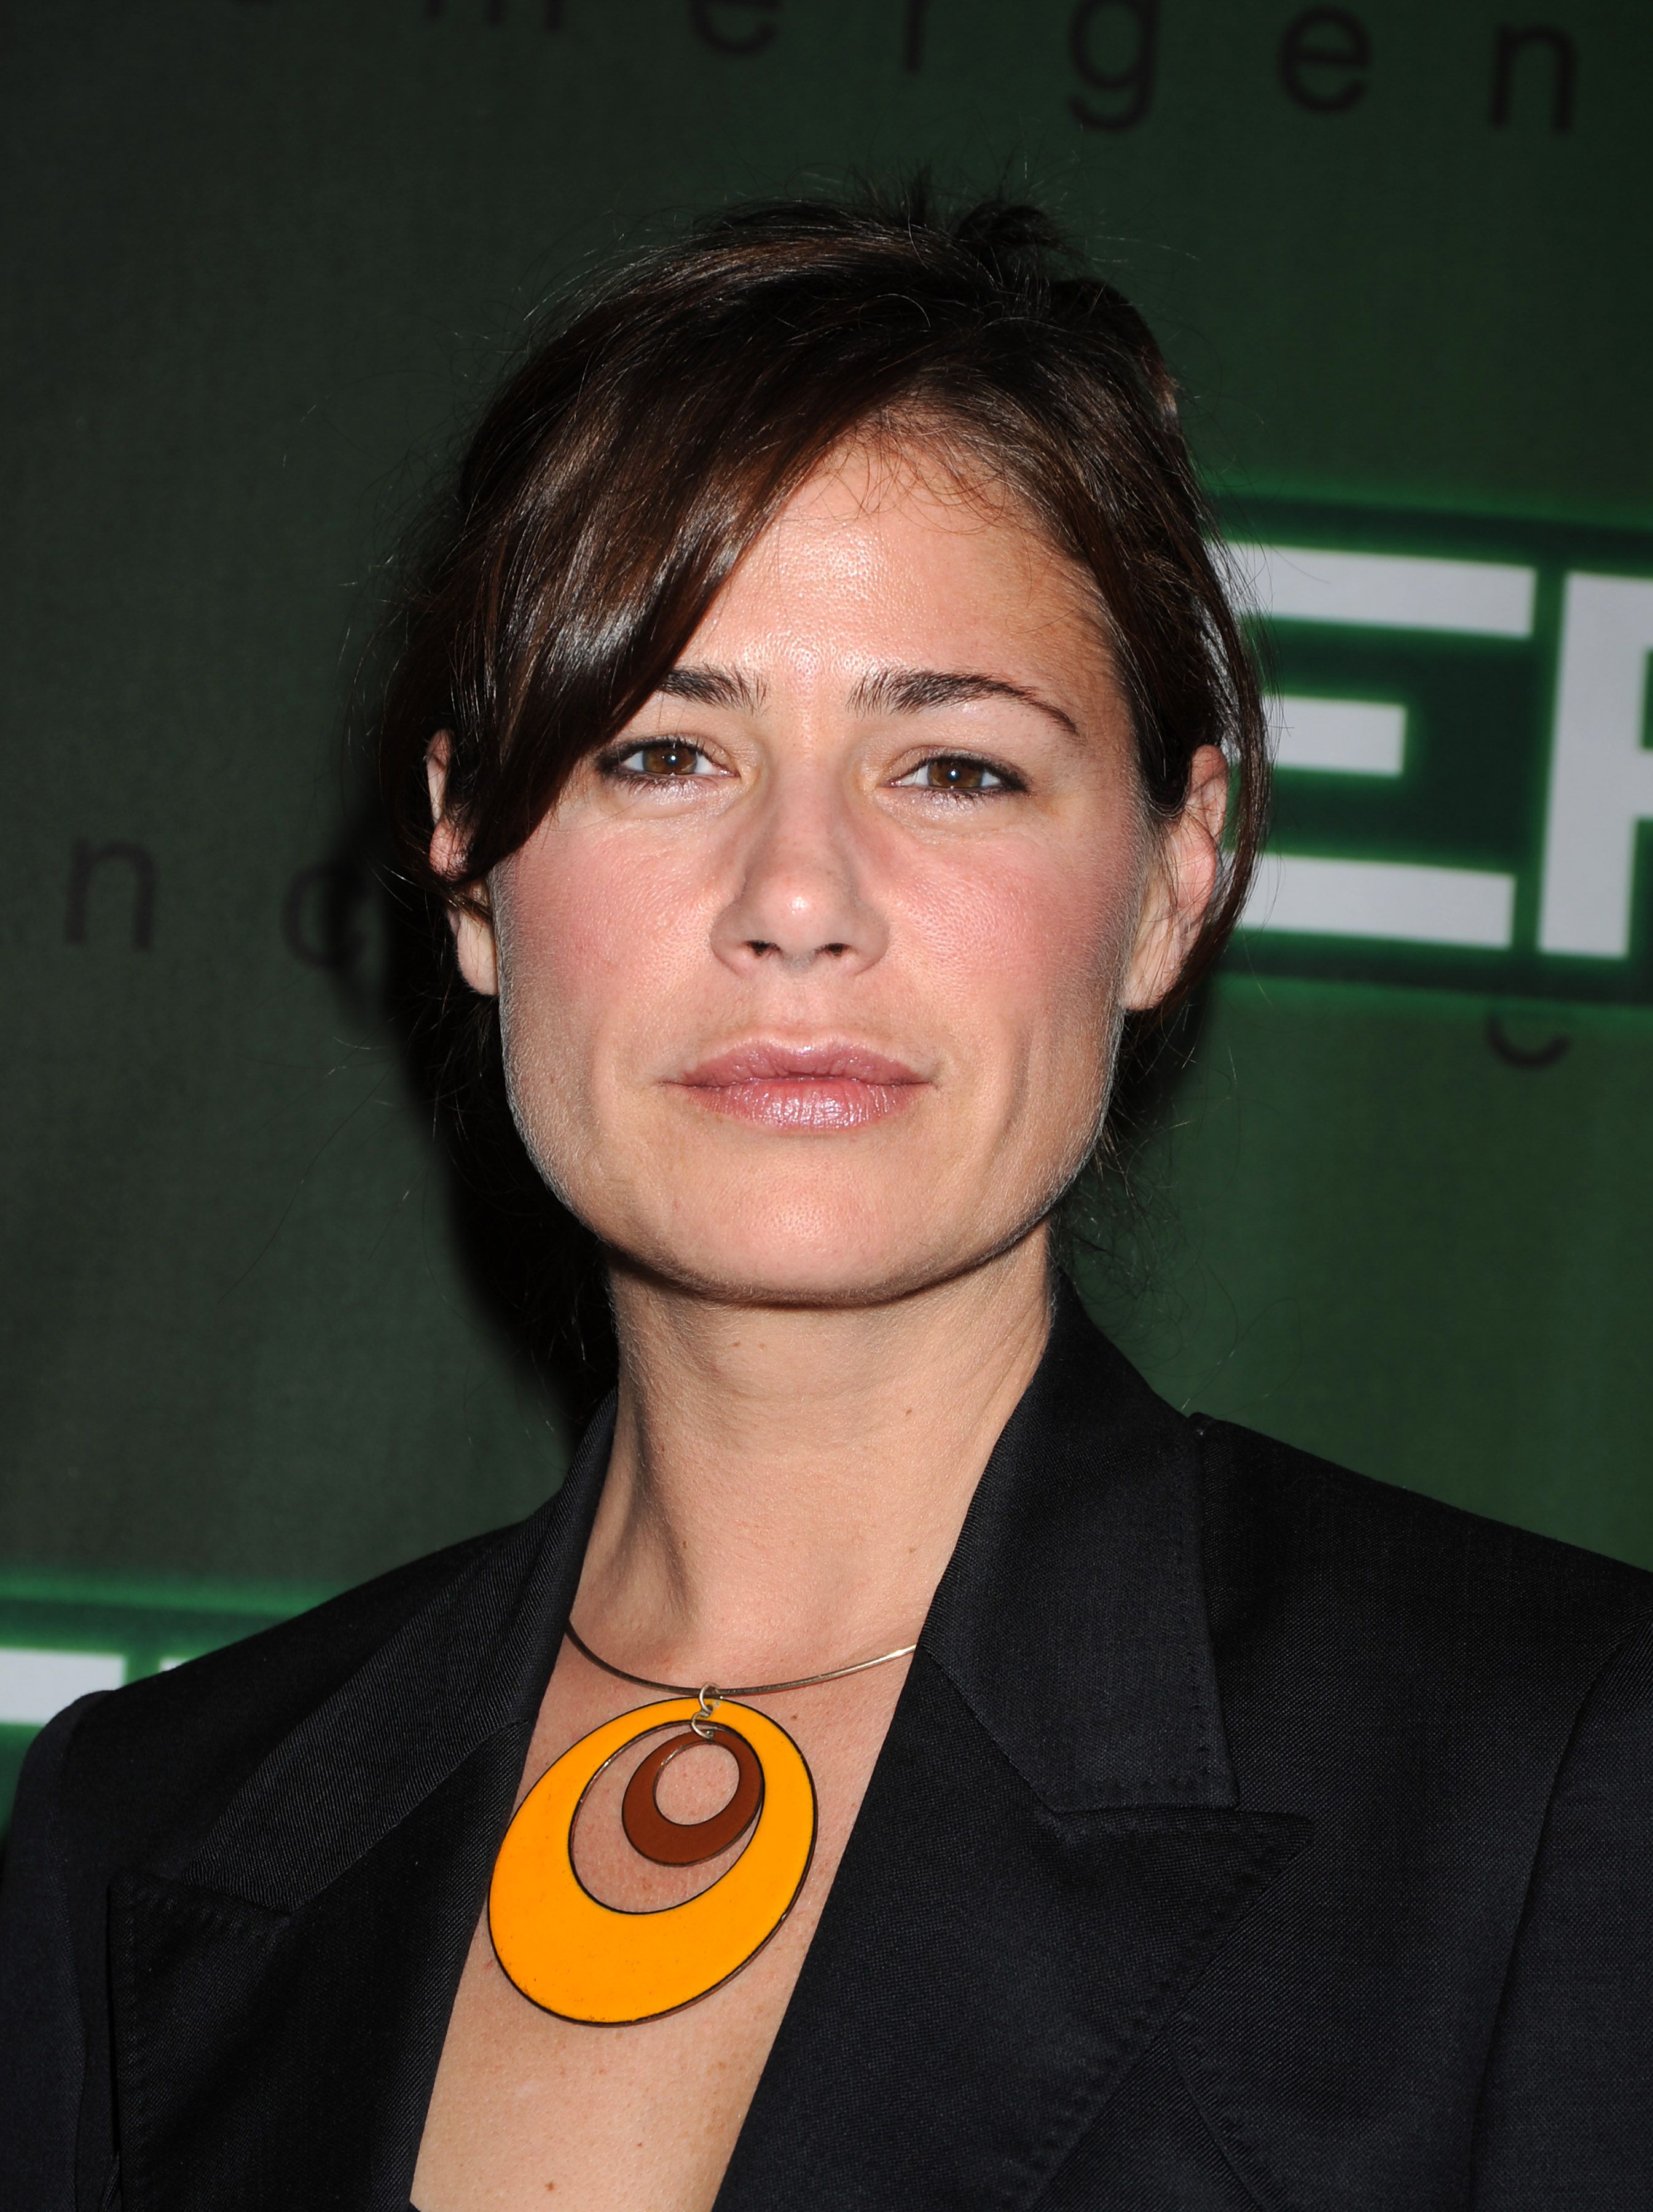 More Pictures Of Maura Tierney. 